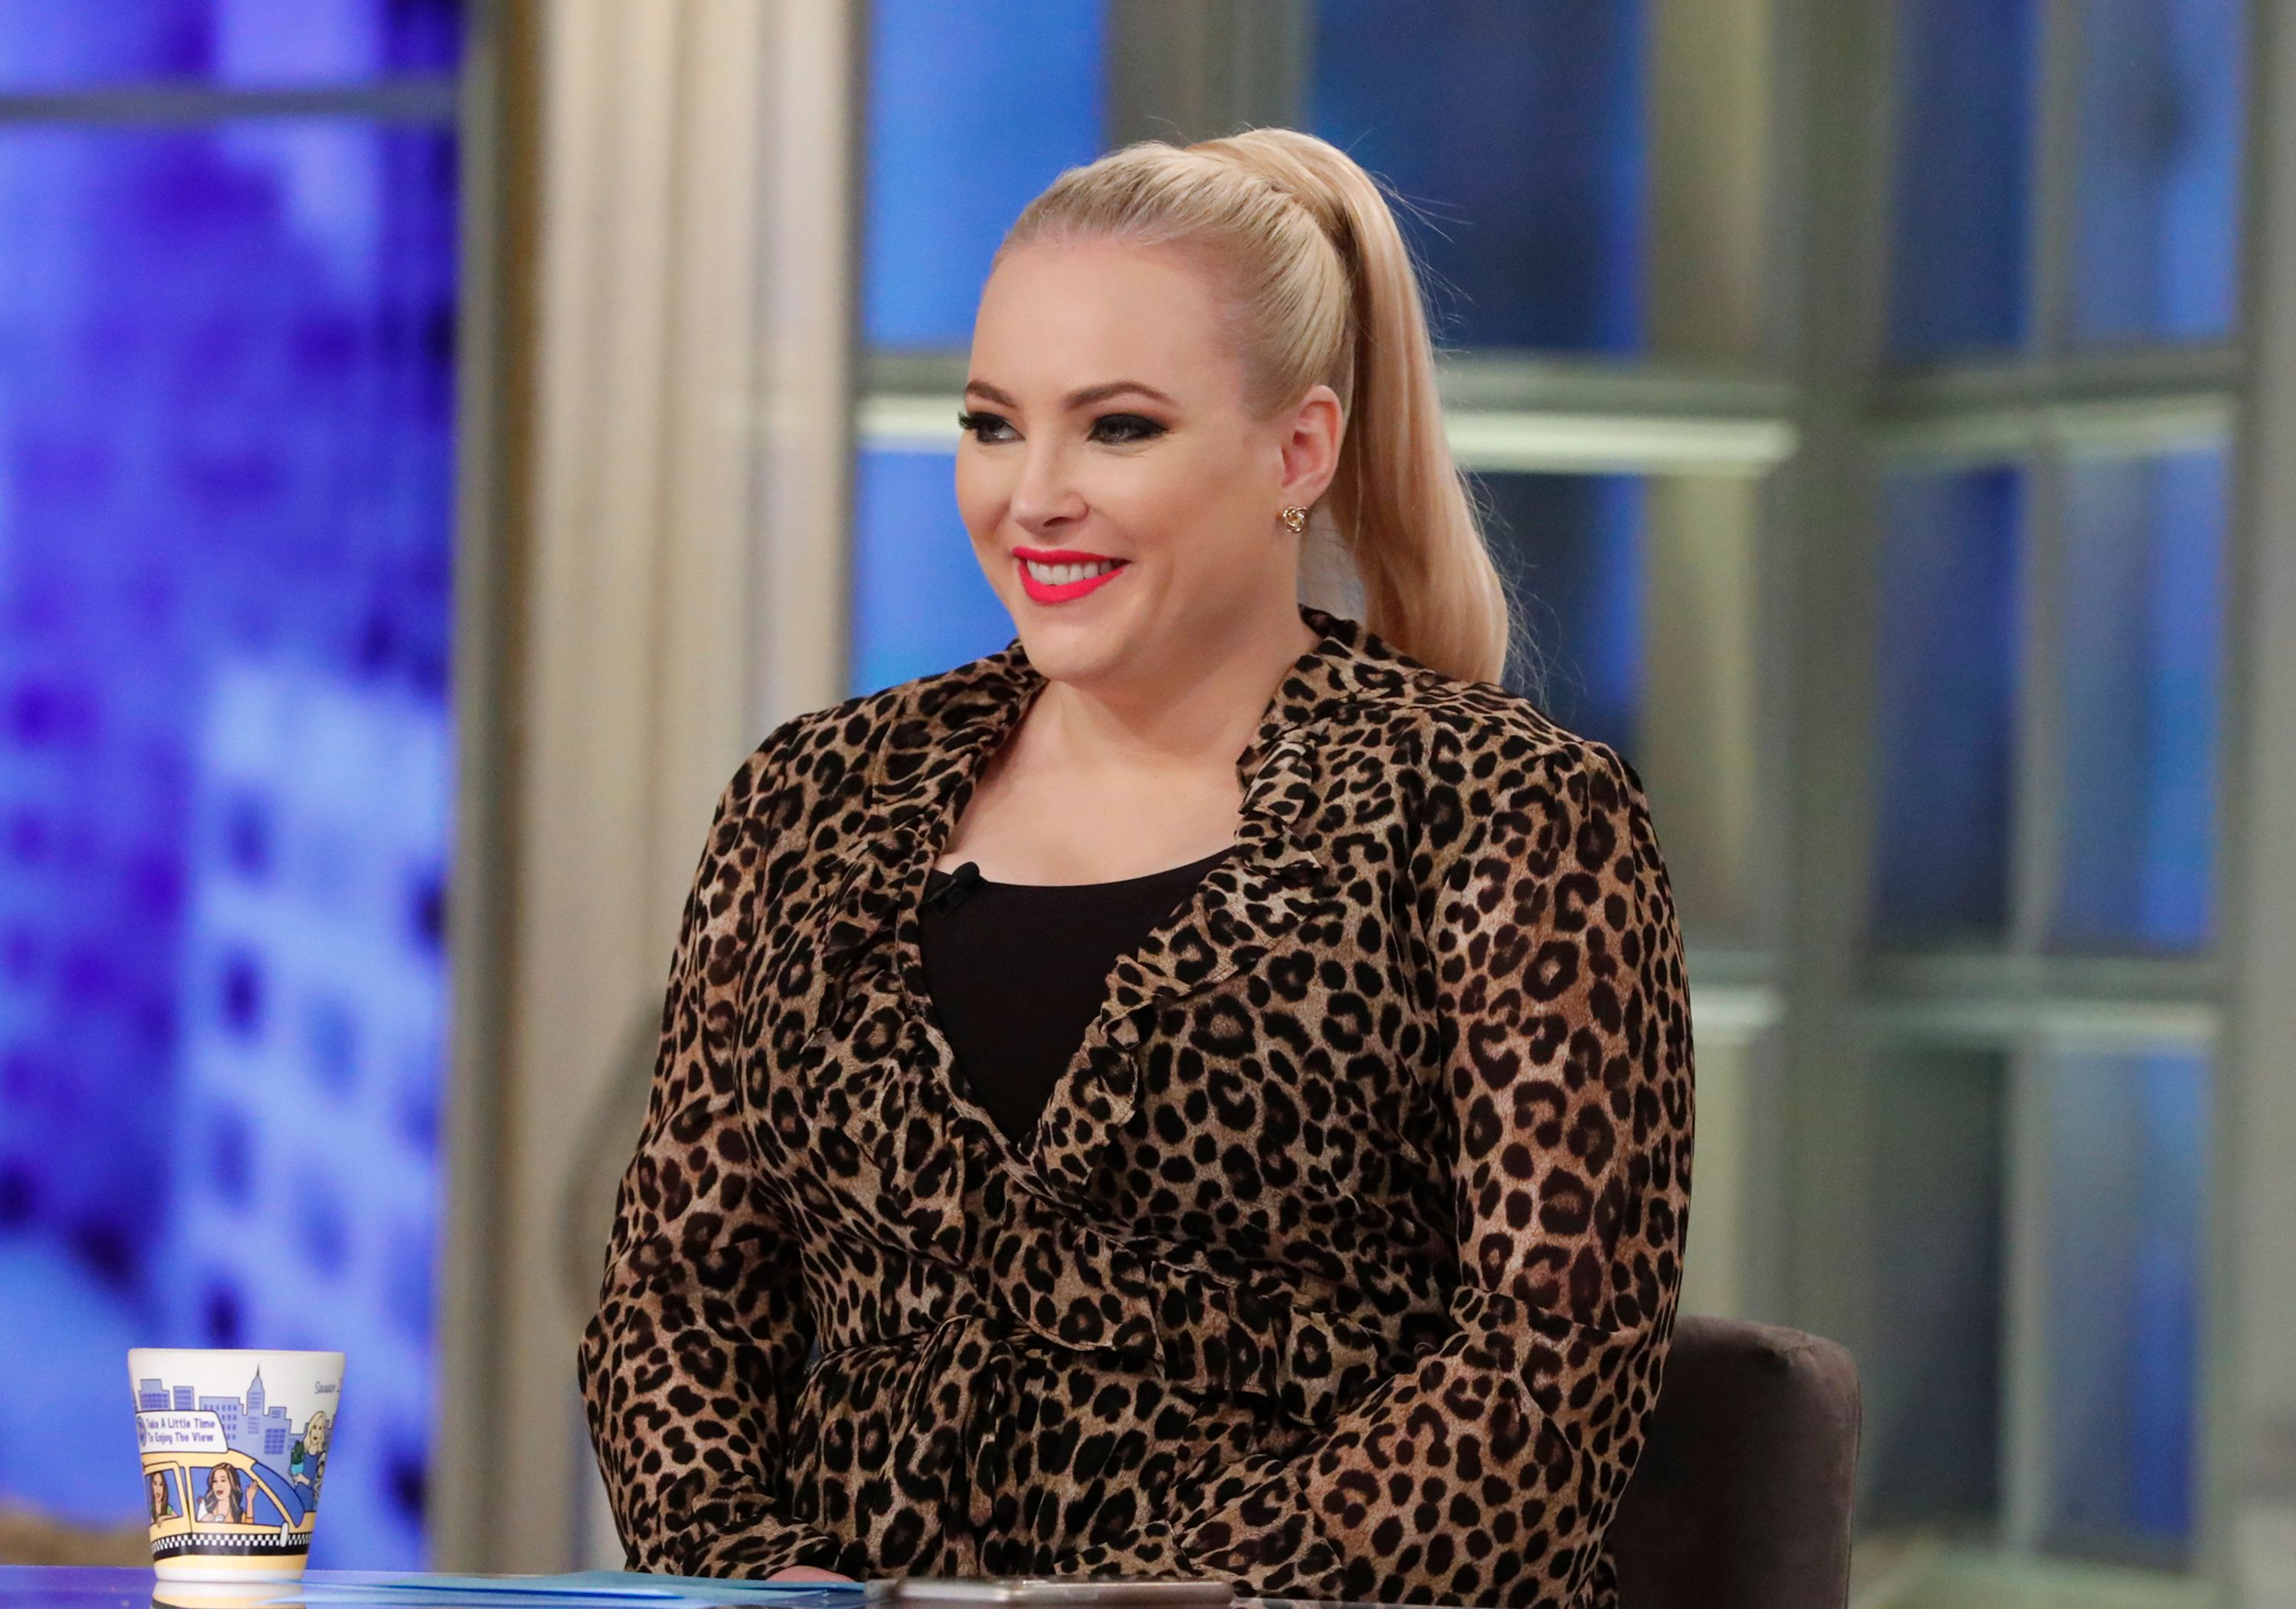 Meghan McCain on "The View" on October 24, 2019 | Photo: Lou Rocco/ABC/Getty Images